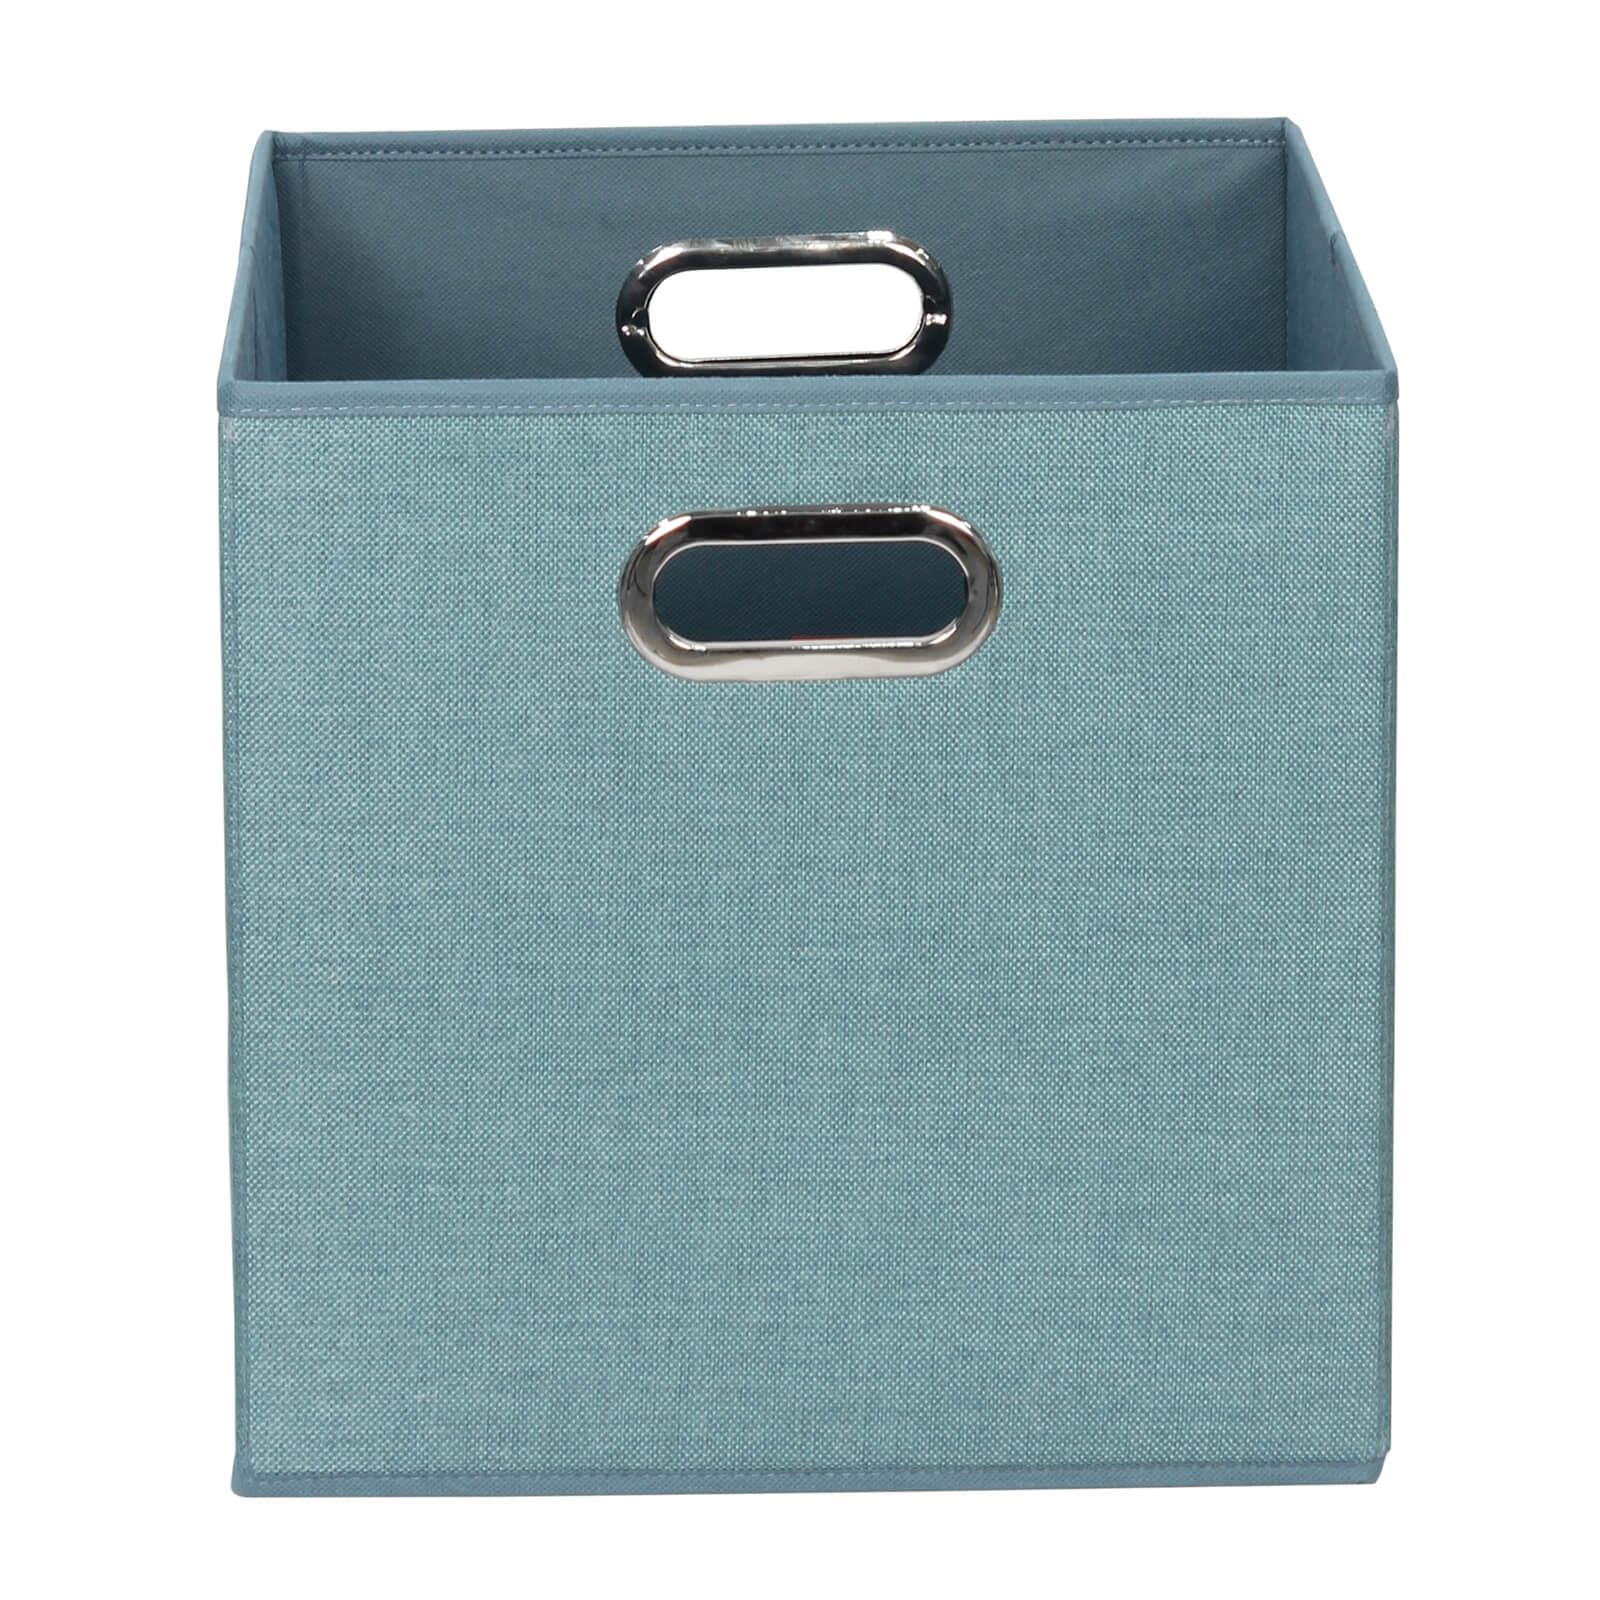 Clever Cube Fabric Insert - Jade Green